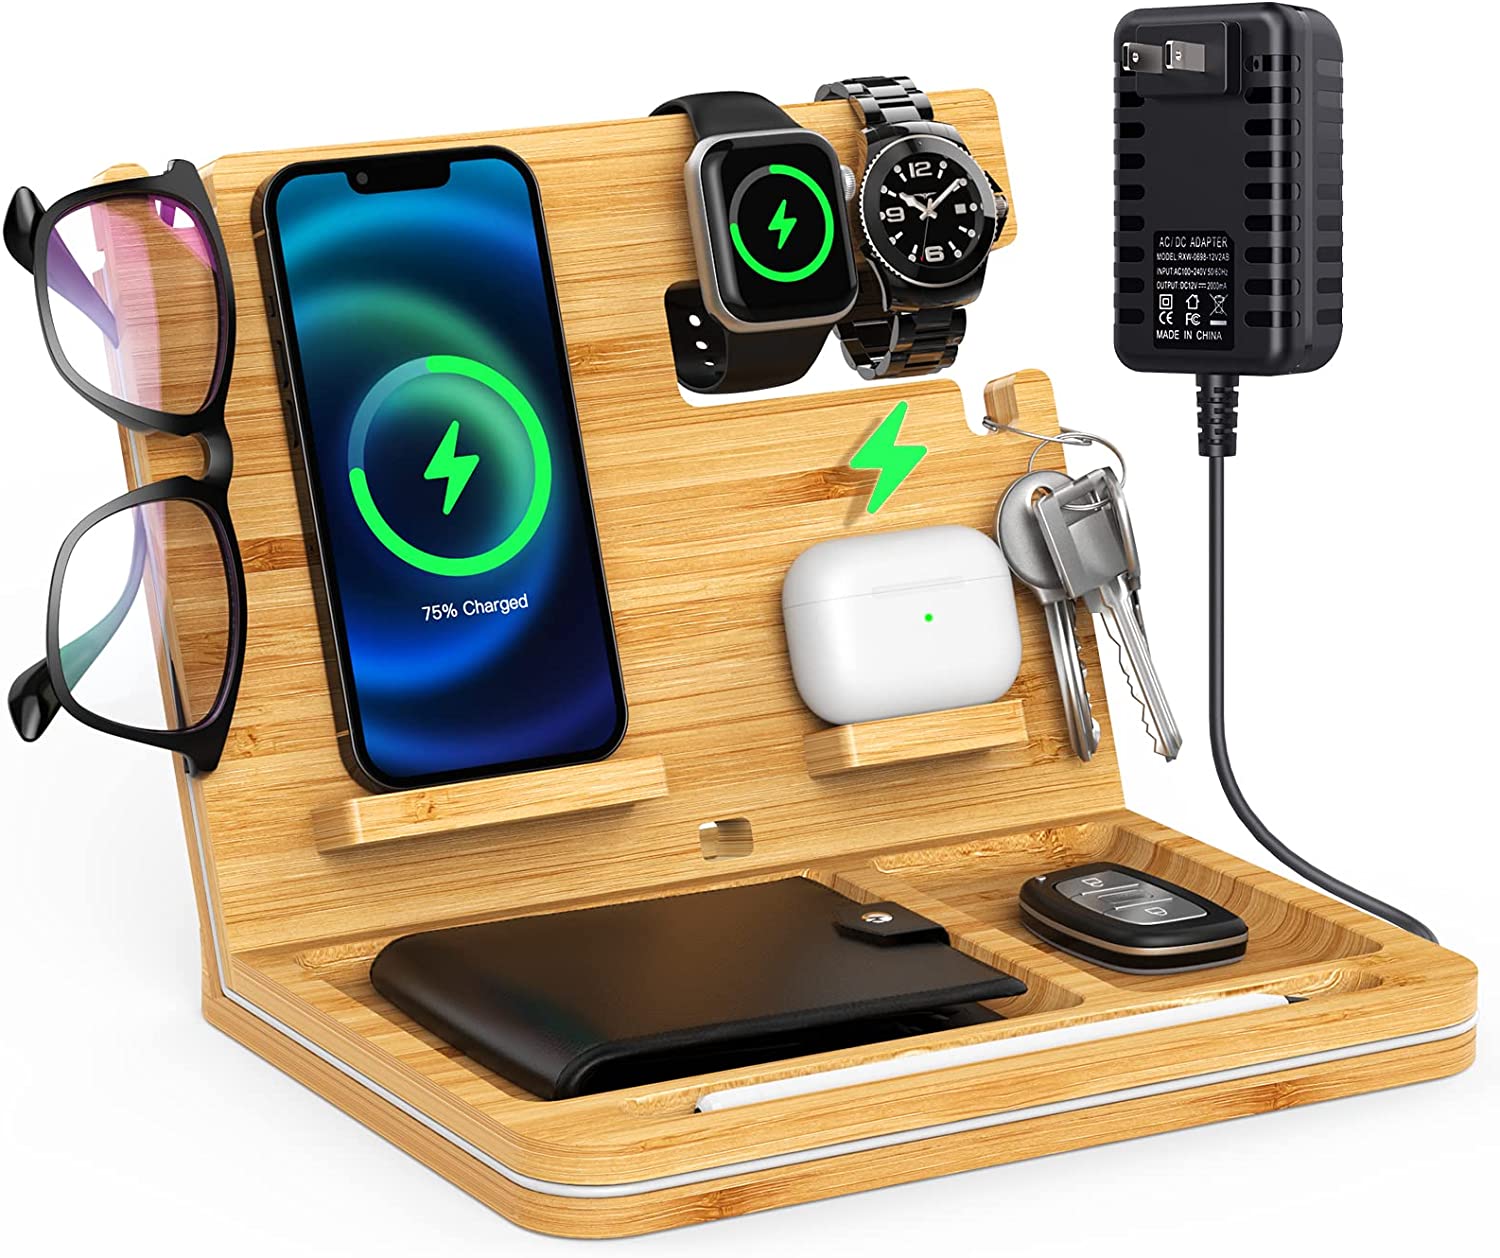 Bamboo OTESS 6 in 1 Wireless Charging Station